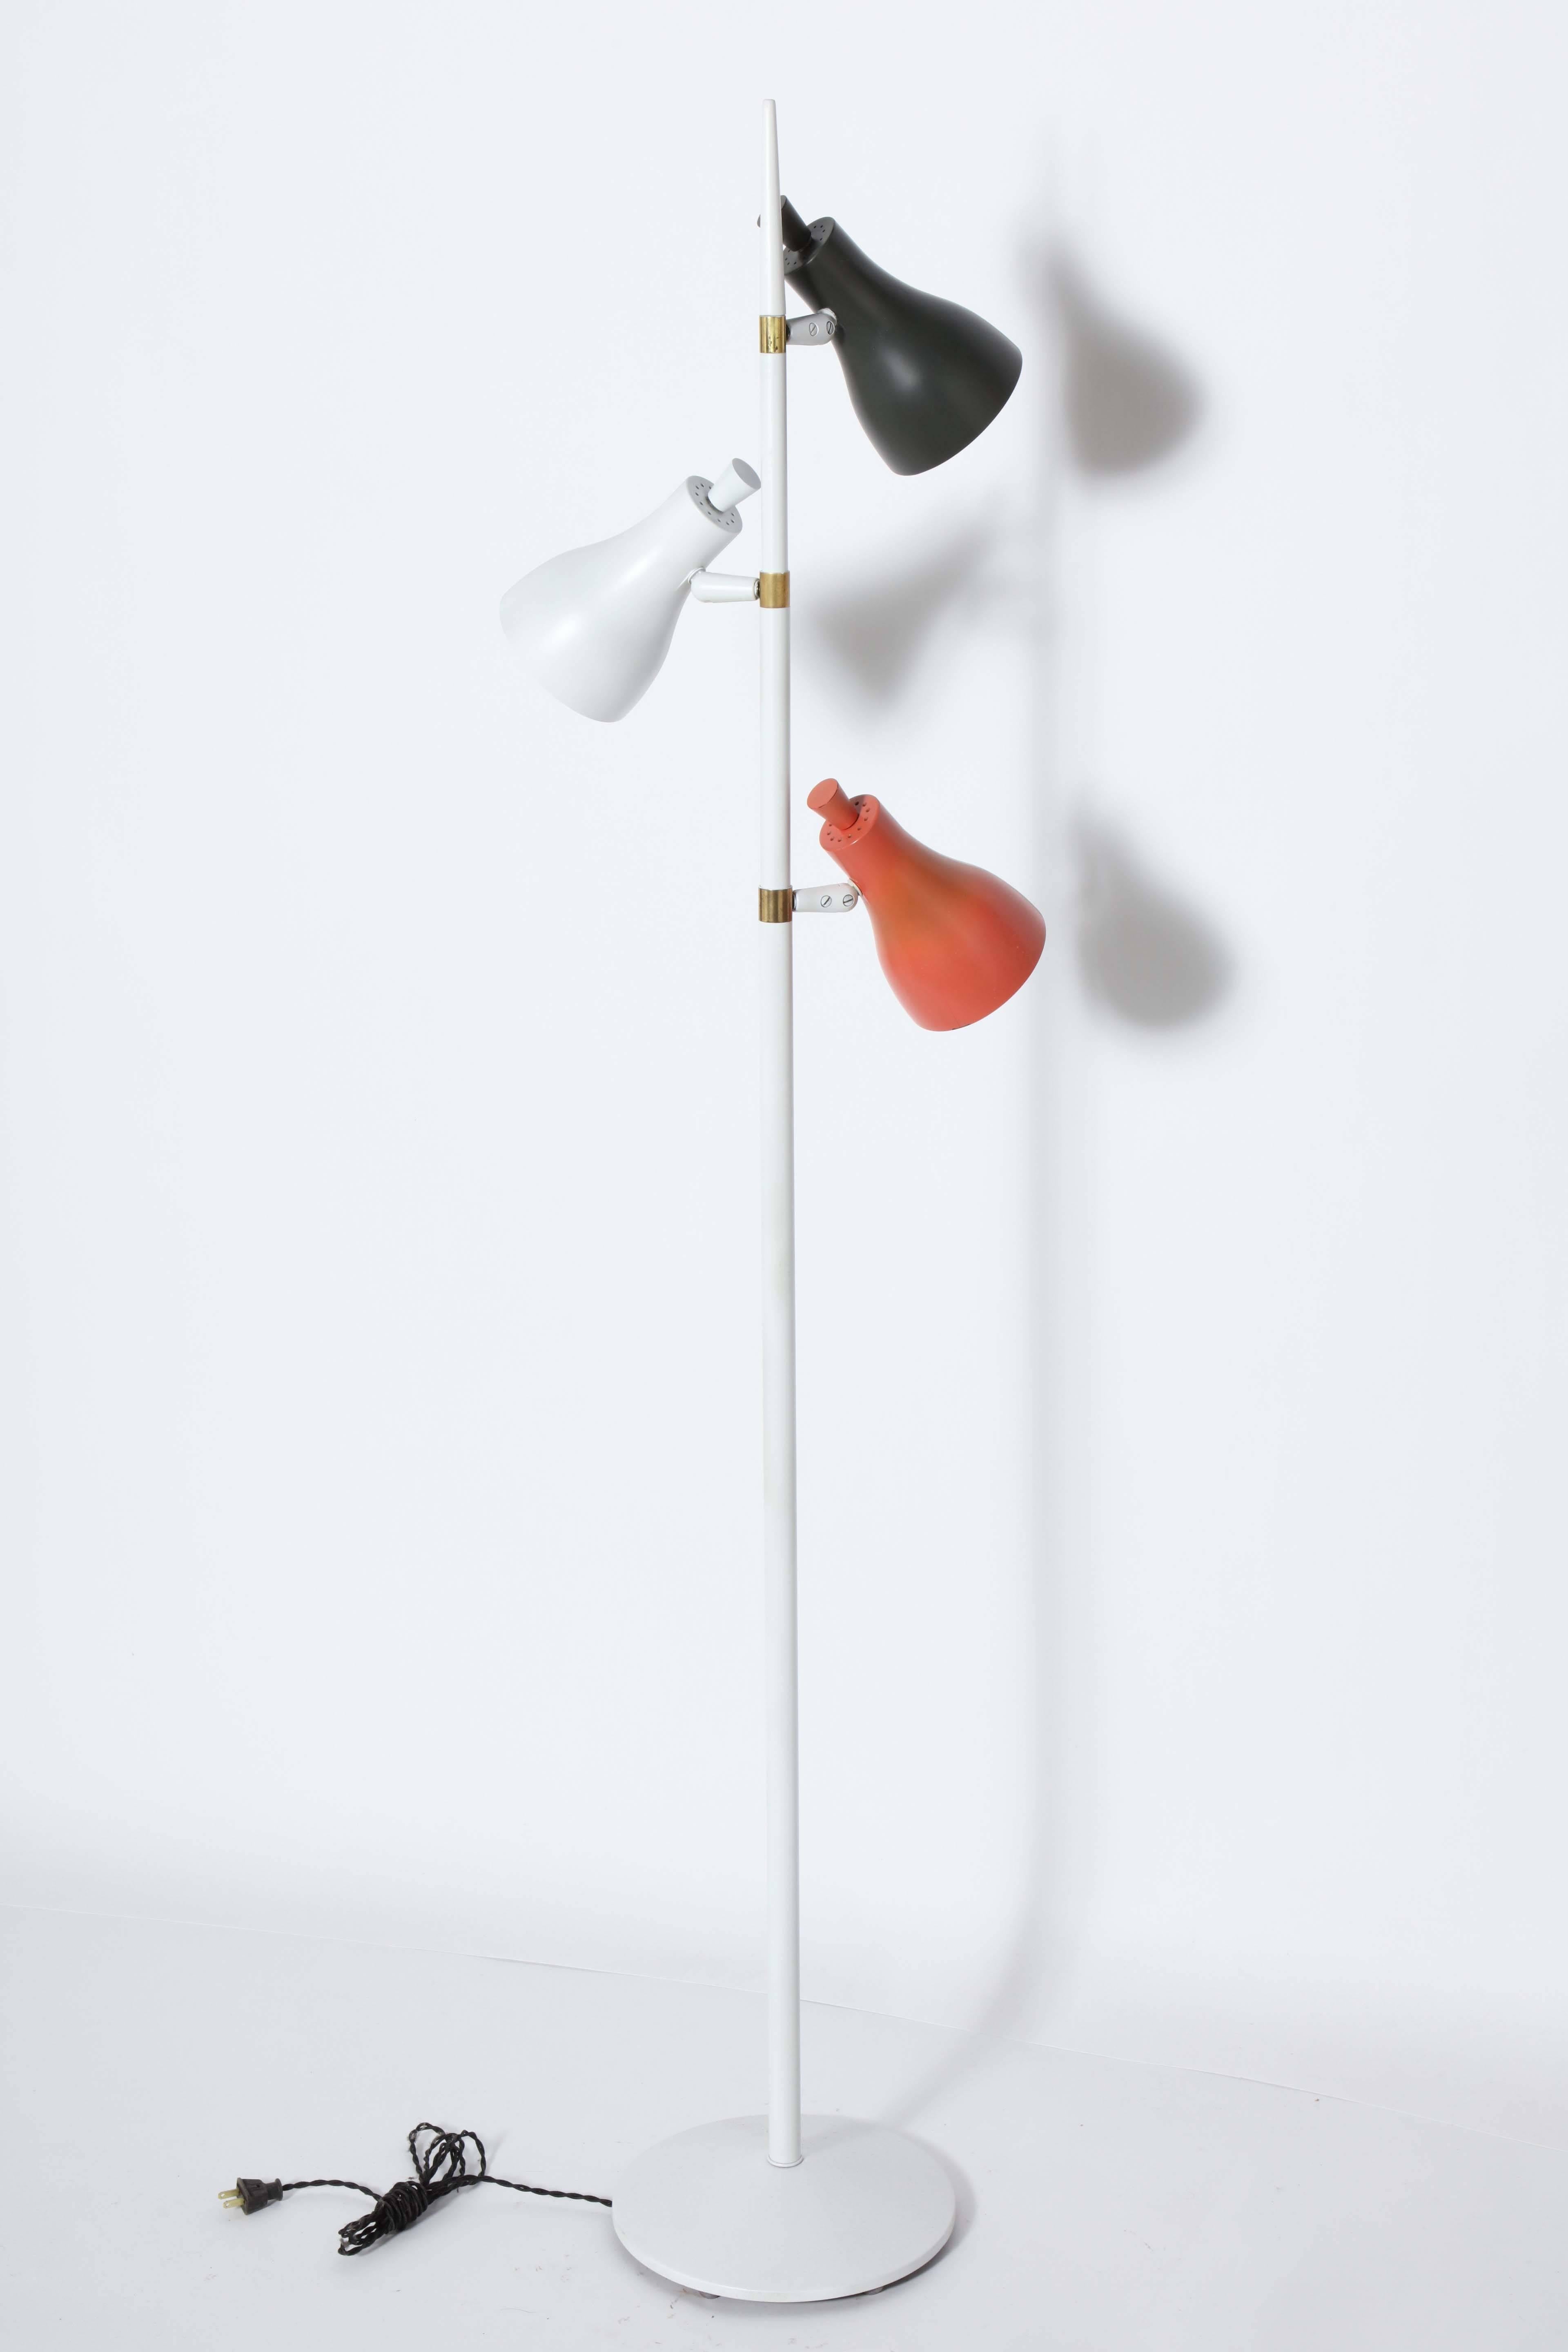 Brass Gerald Thurston Tri-Color Floor Lamp with Black, White and Red Shades, 1950s